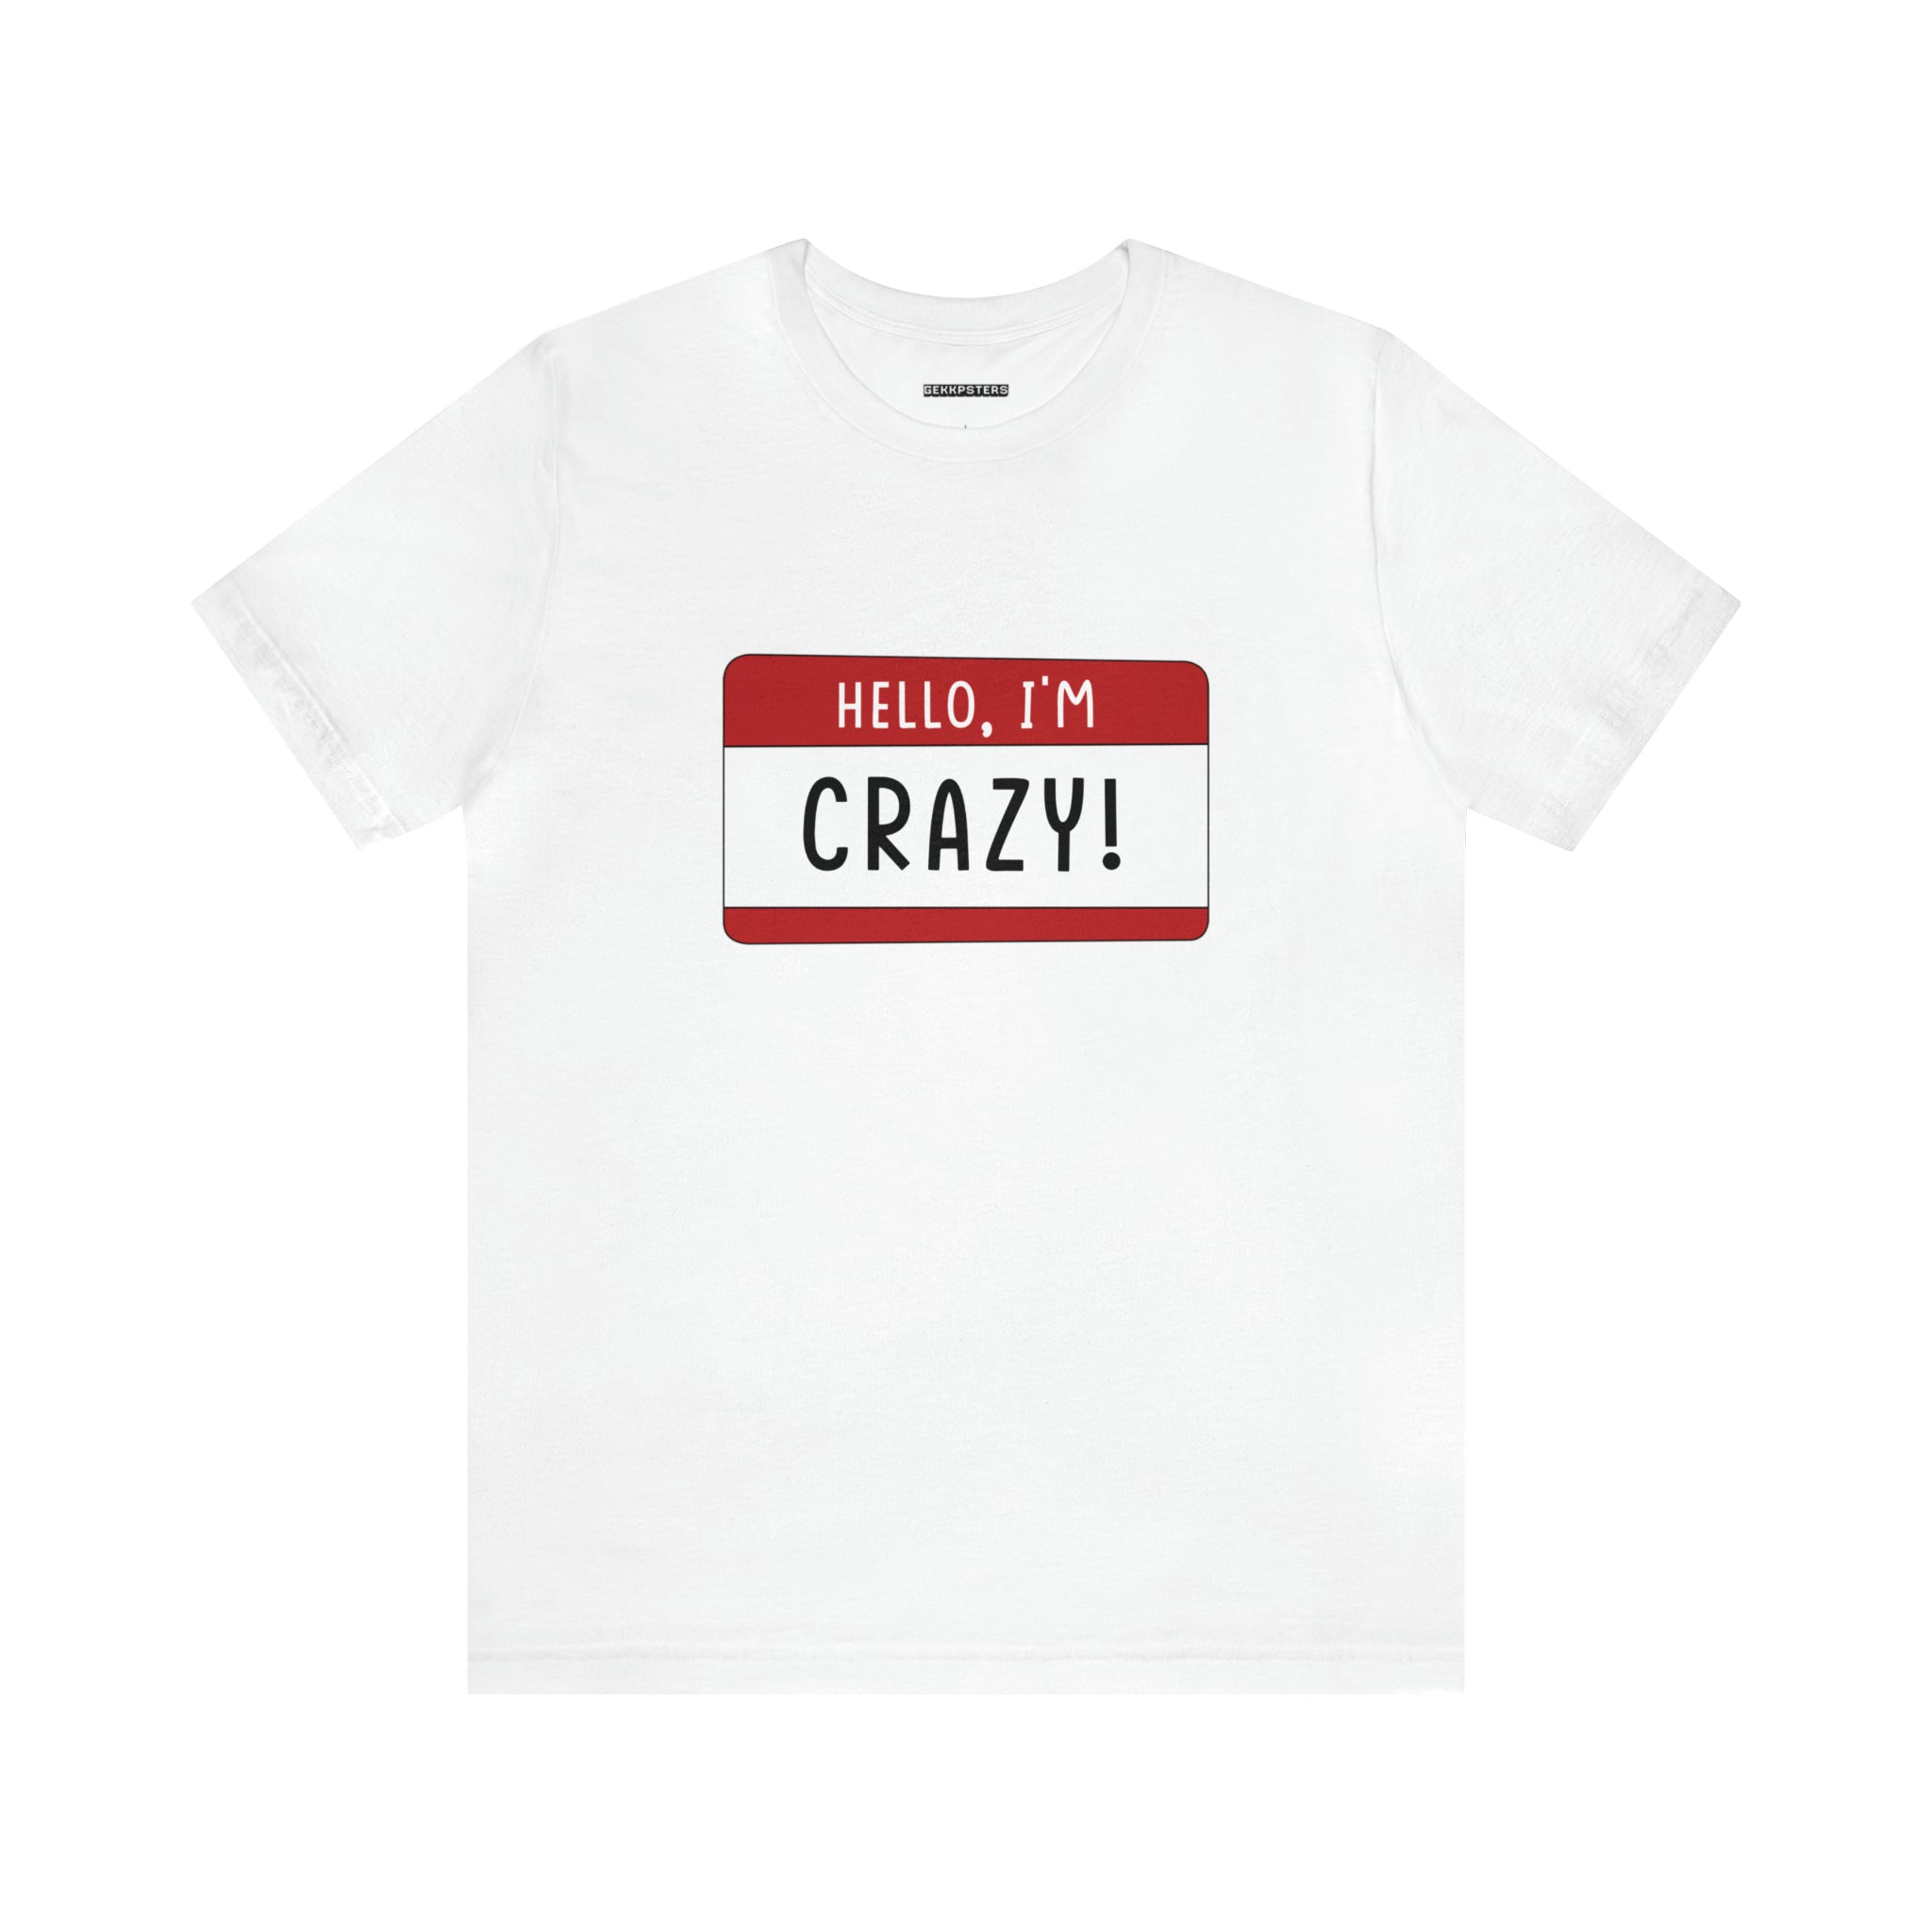 Hello, I'm CRAZY T-Shirt with a red name tag graphic saying "hello, i'm crazy!" styled in uppercase, centered on the chest area. This quirky t-shirt makes a bold statement with its unique design.